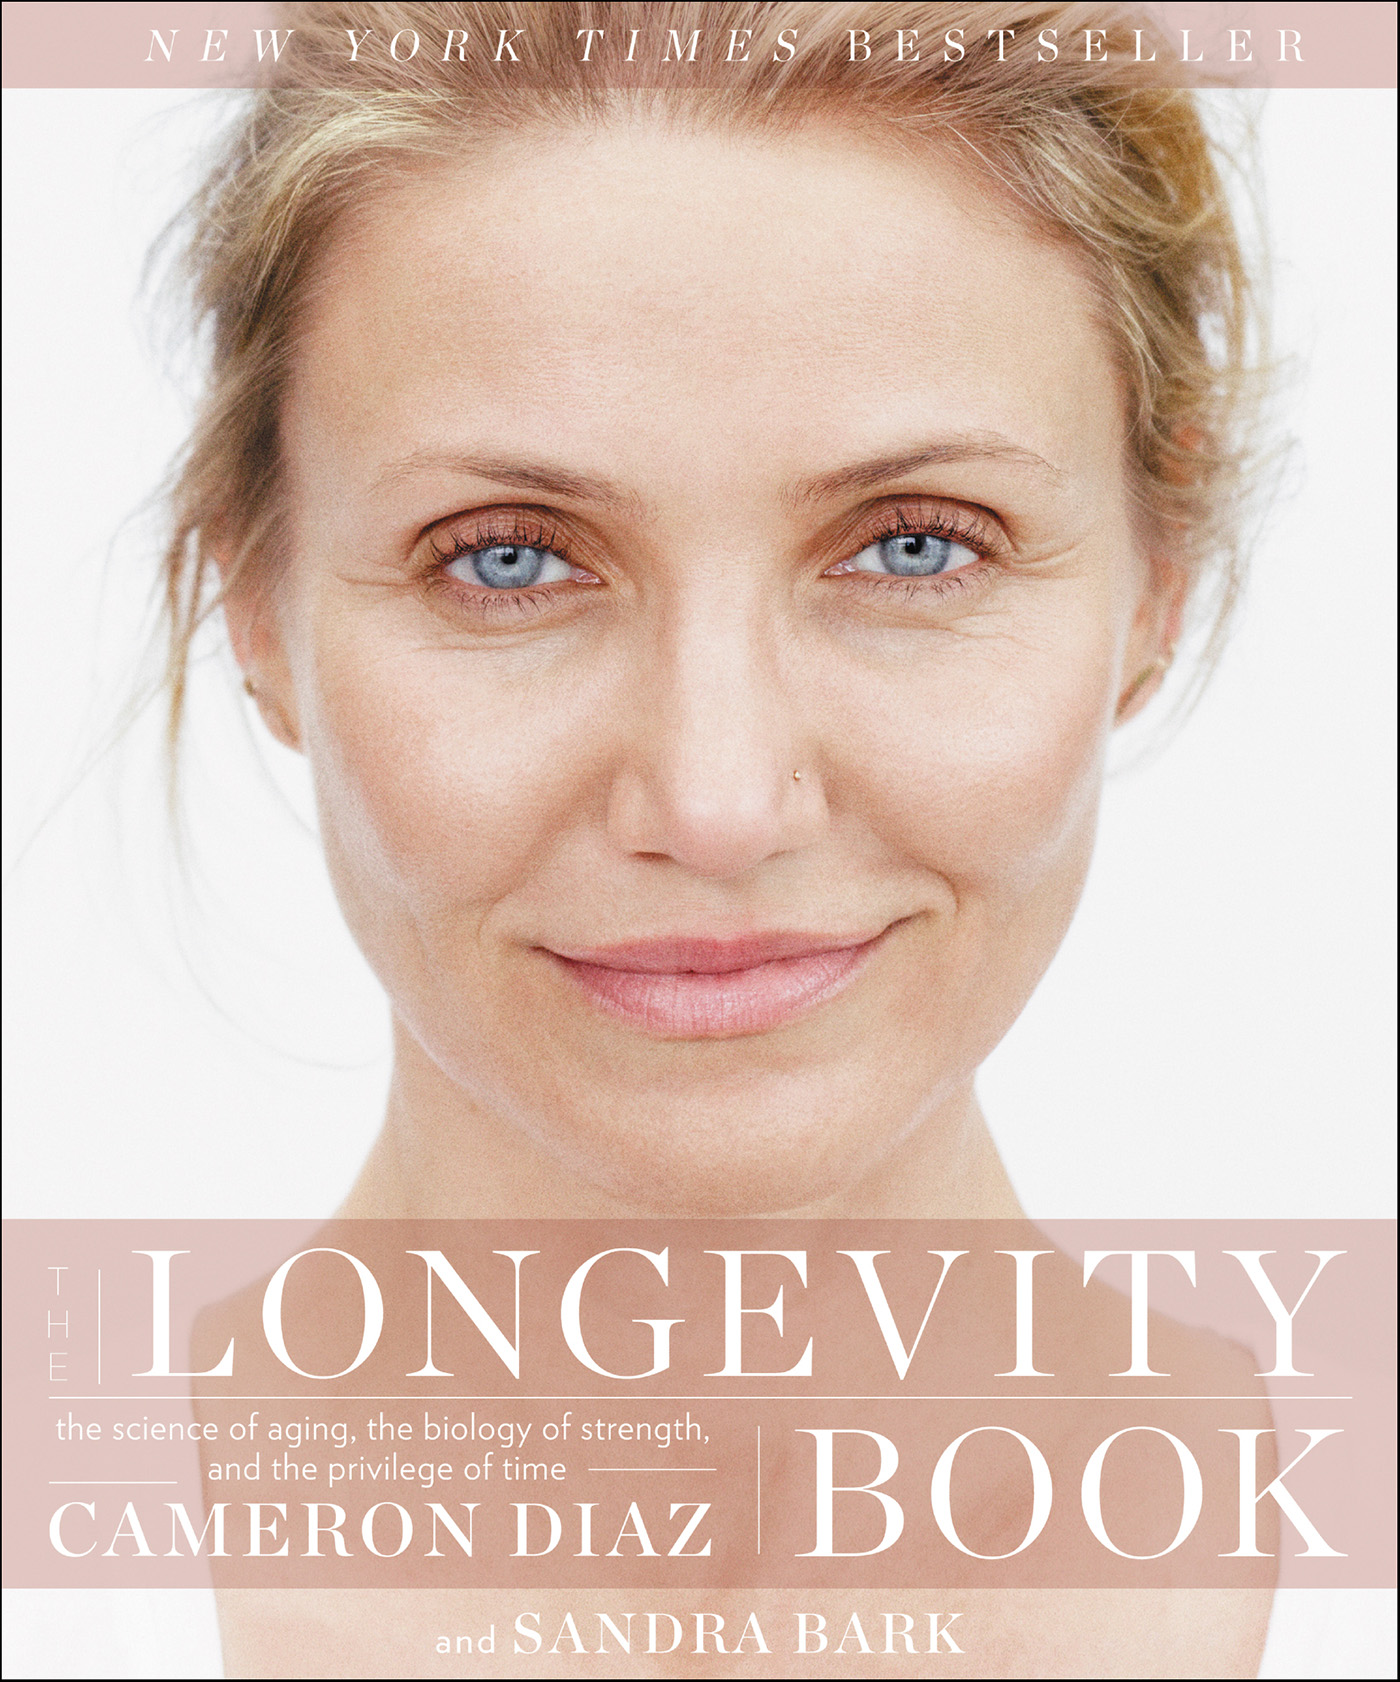 Umschlagbild für The Longevity Book [electronic resource] : The Science of Aging, the Biology of Strength, and the Privilege of Time